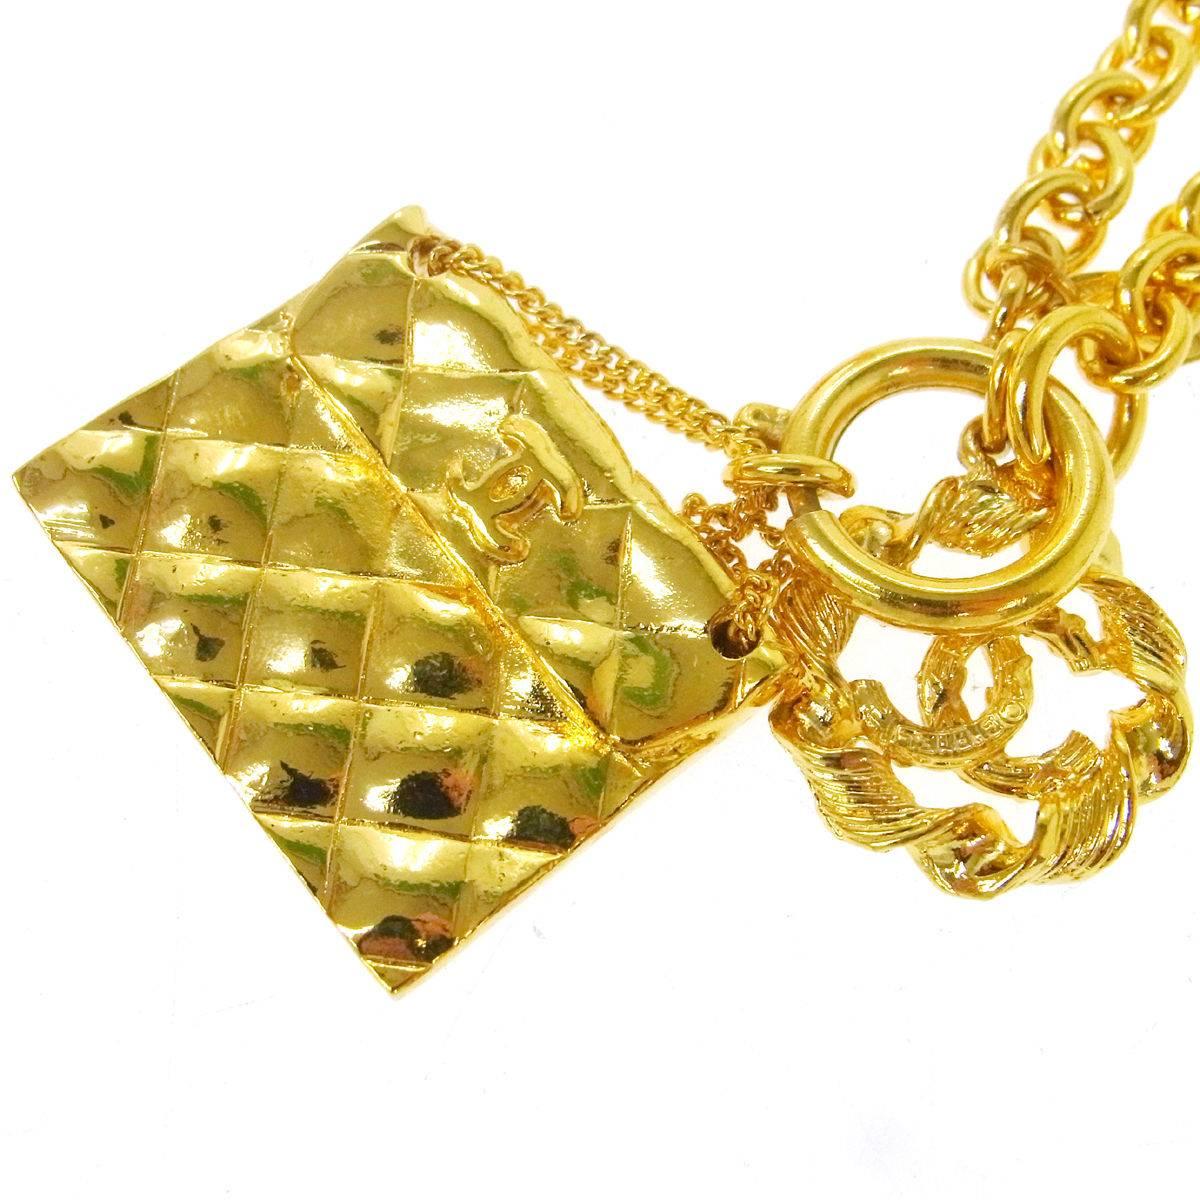 CURATOR'S NOTES

Chanel Vintage Gold Flap Bag Charm Chain Necklace 

Metal
Gold tone
Lobster claw closure
Made in France
Charm diameter ~1"
Total chain length 23.5"